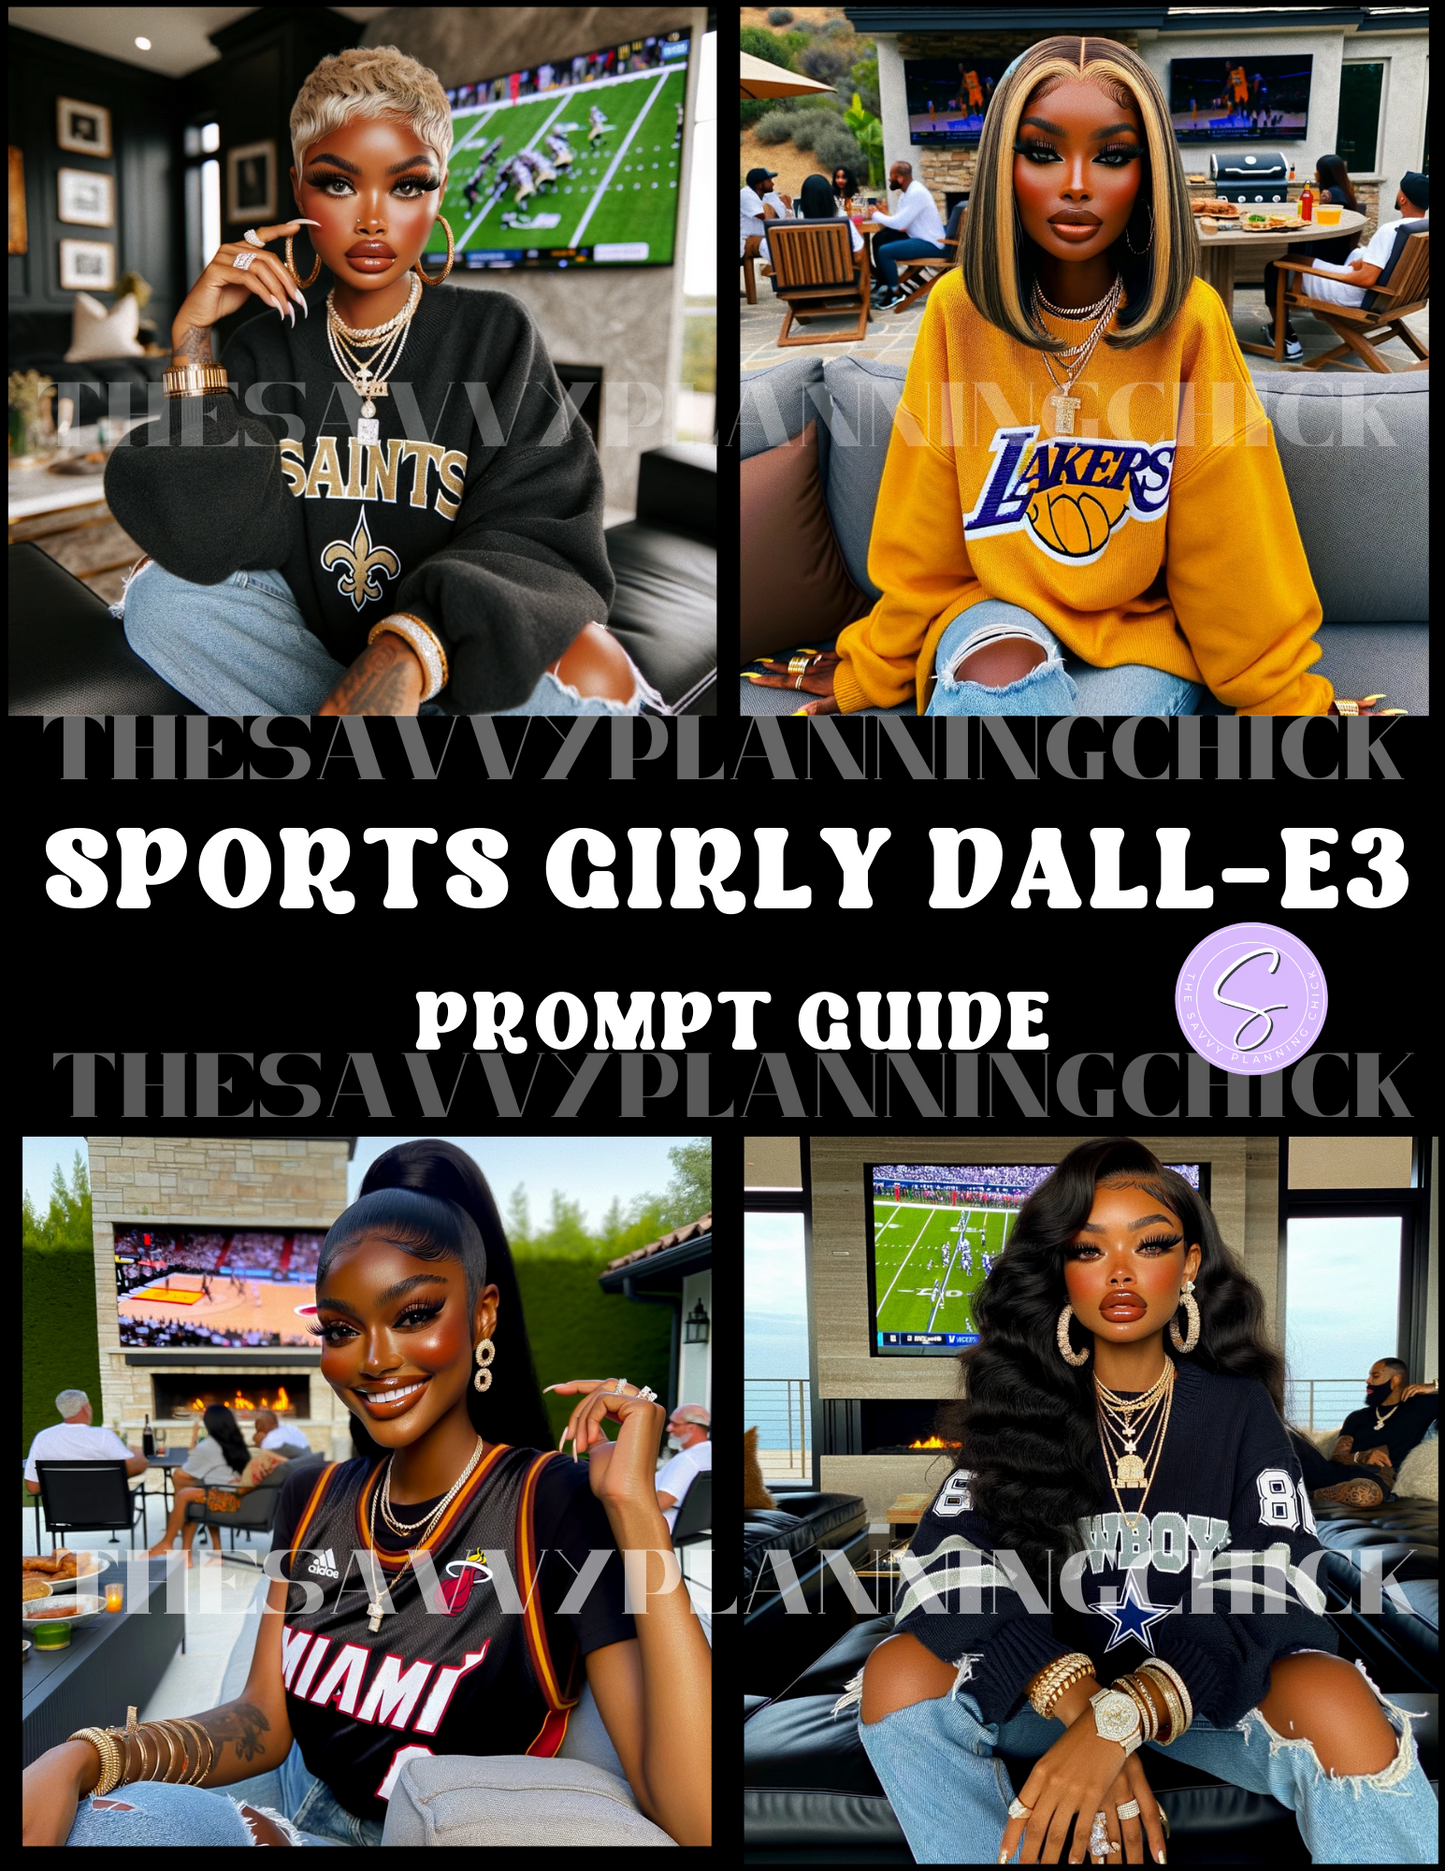 Sports Girly DALL-E3 Prompt Guide